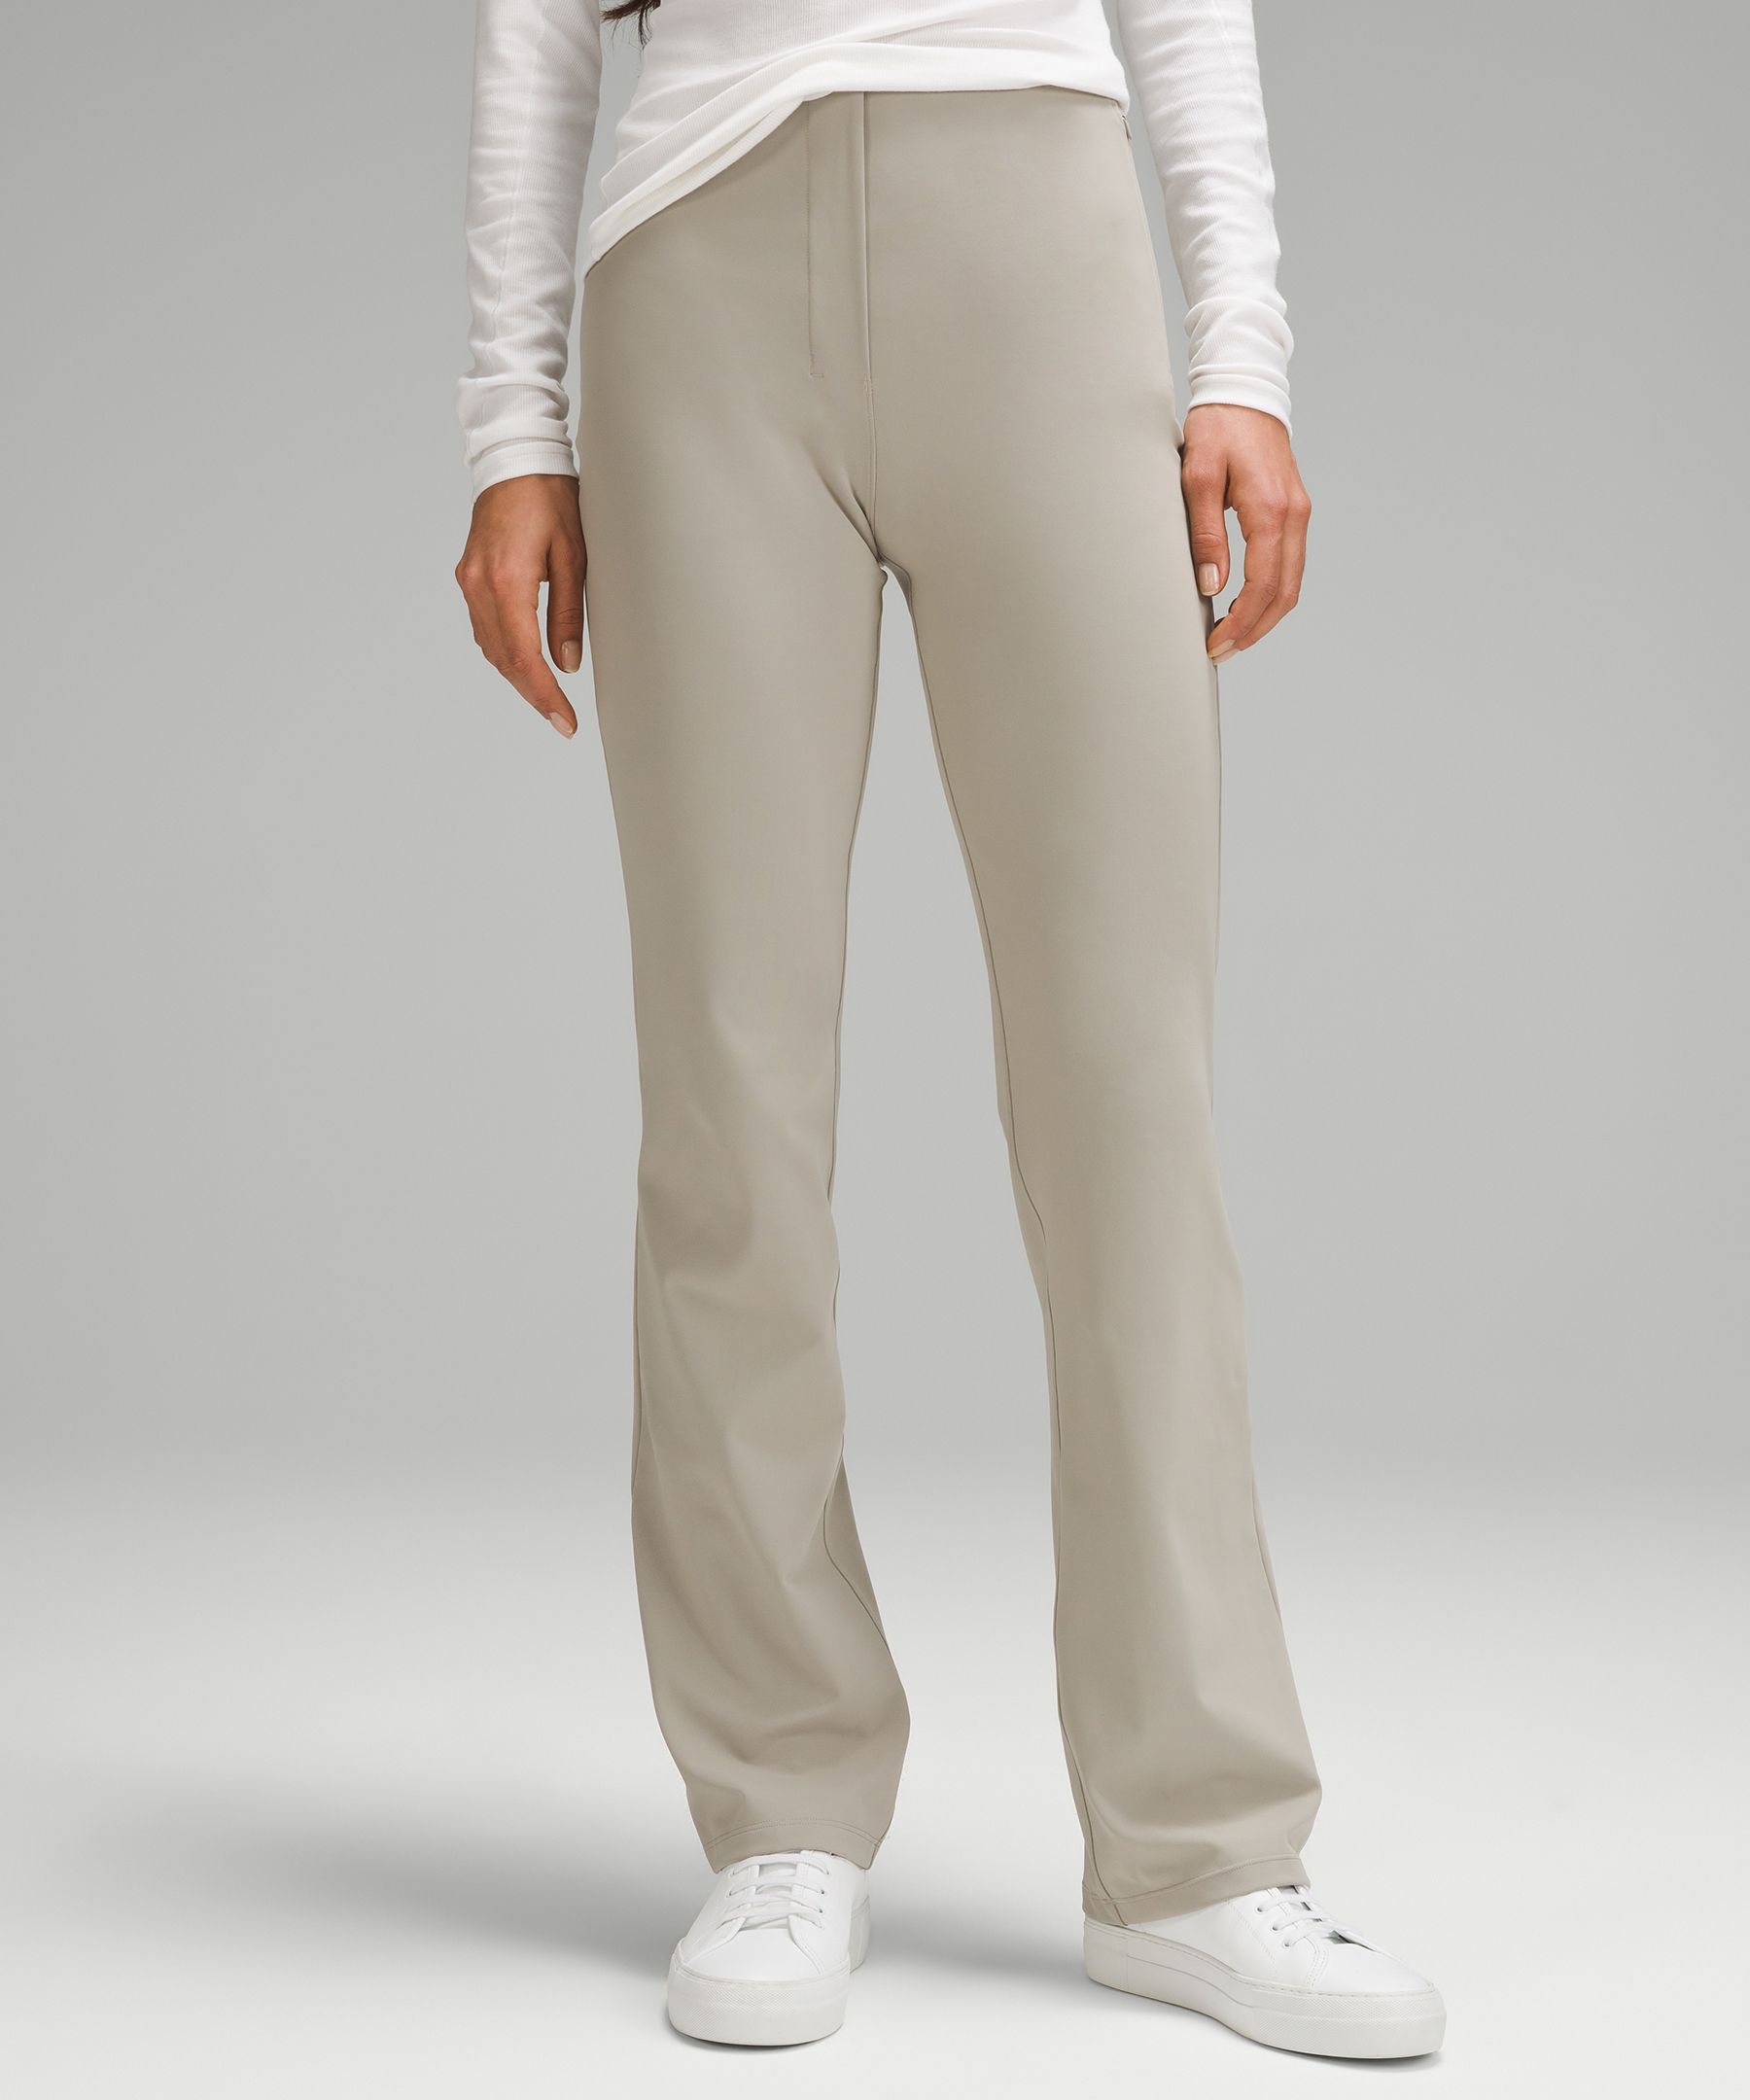 Smooth Fit Pull-On High-Rise Pant *Regular